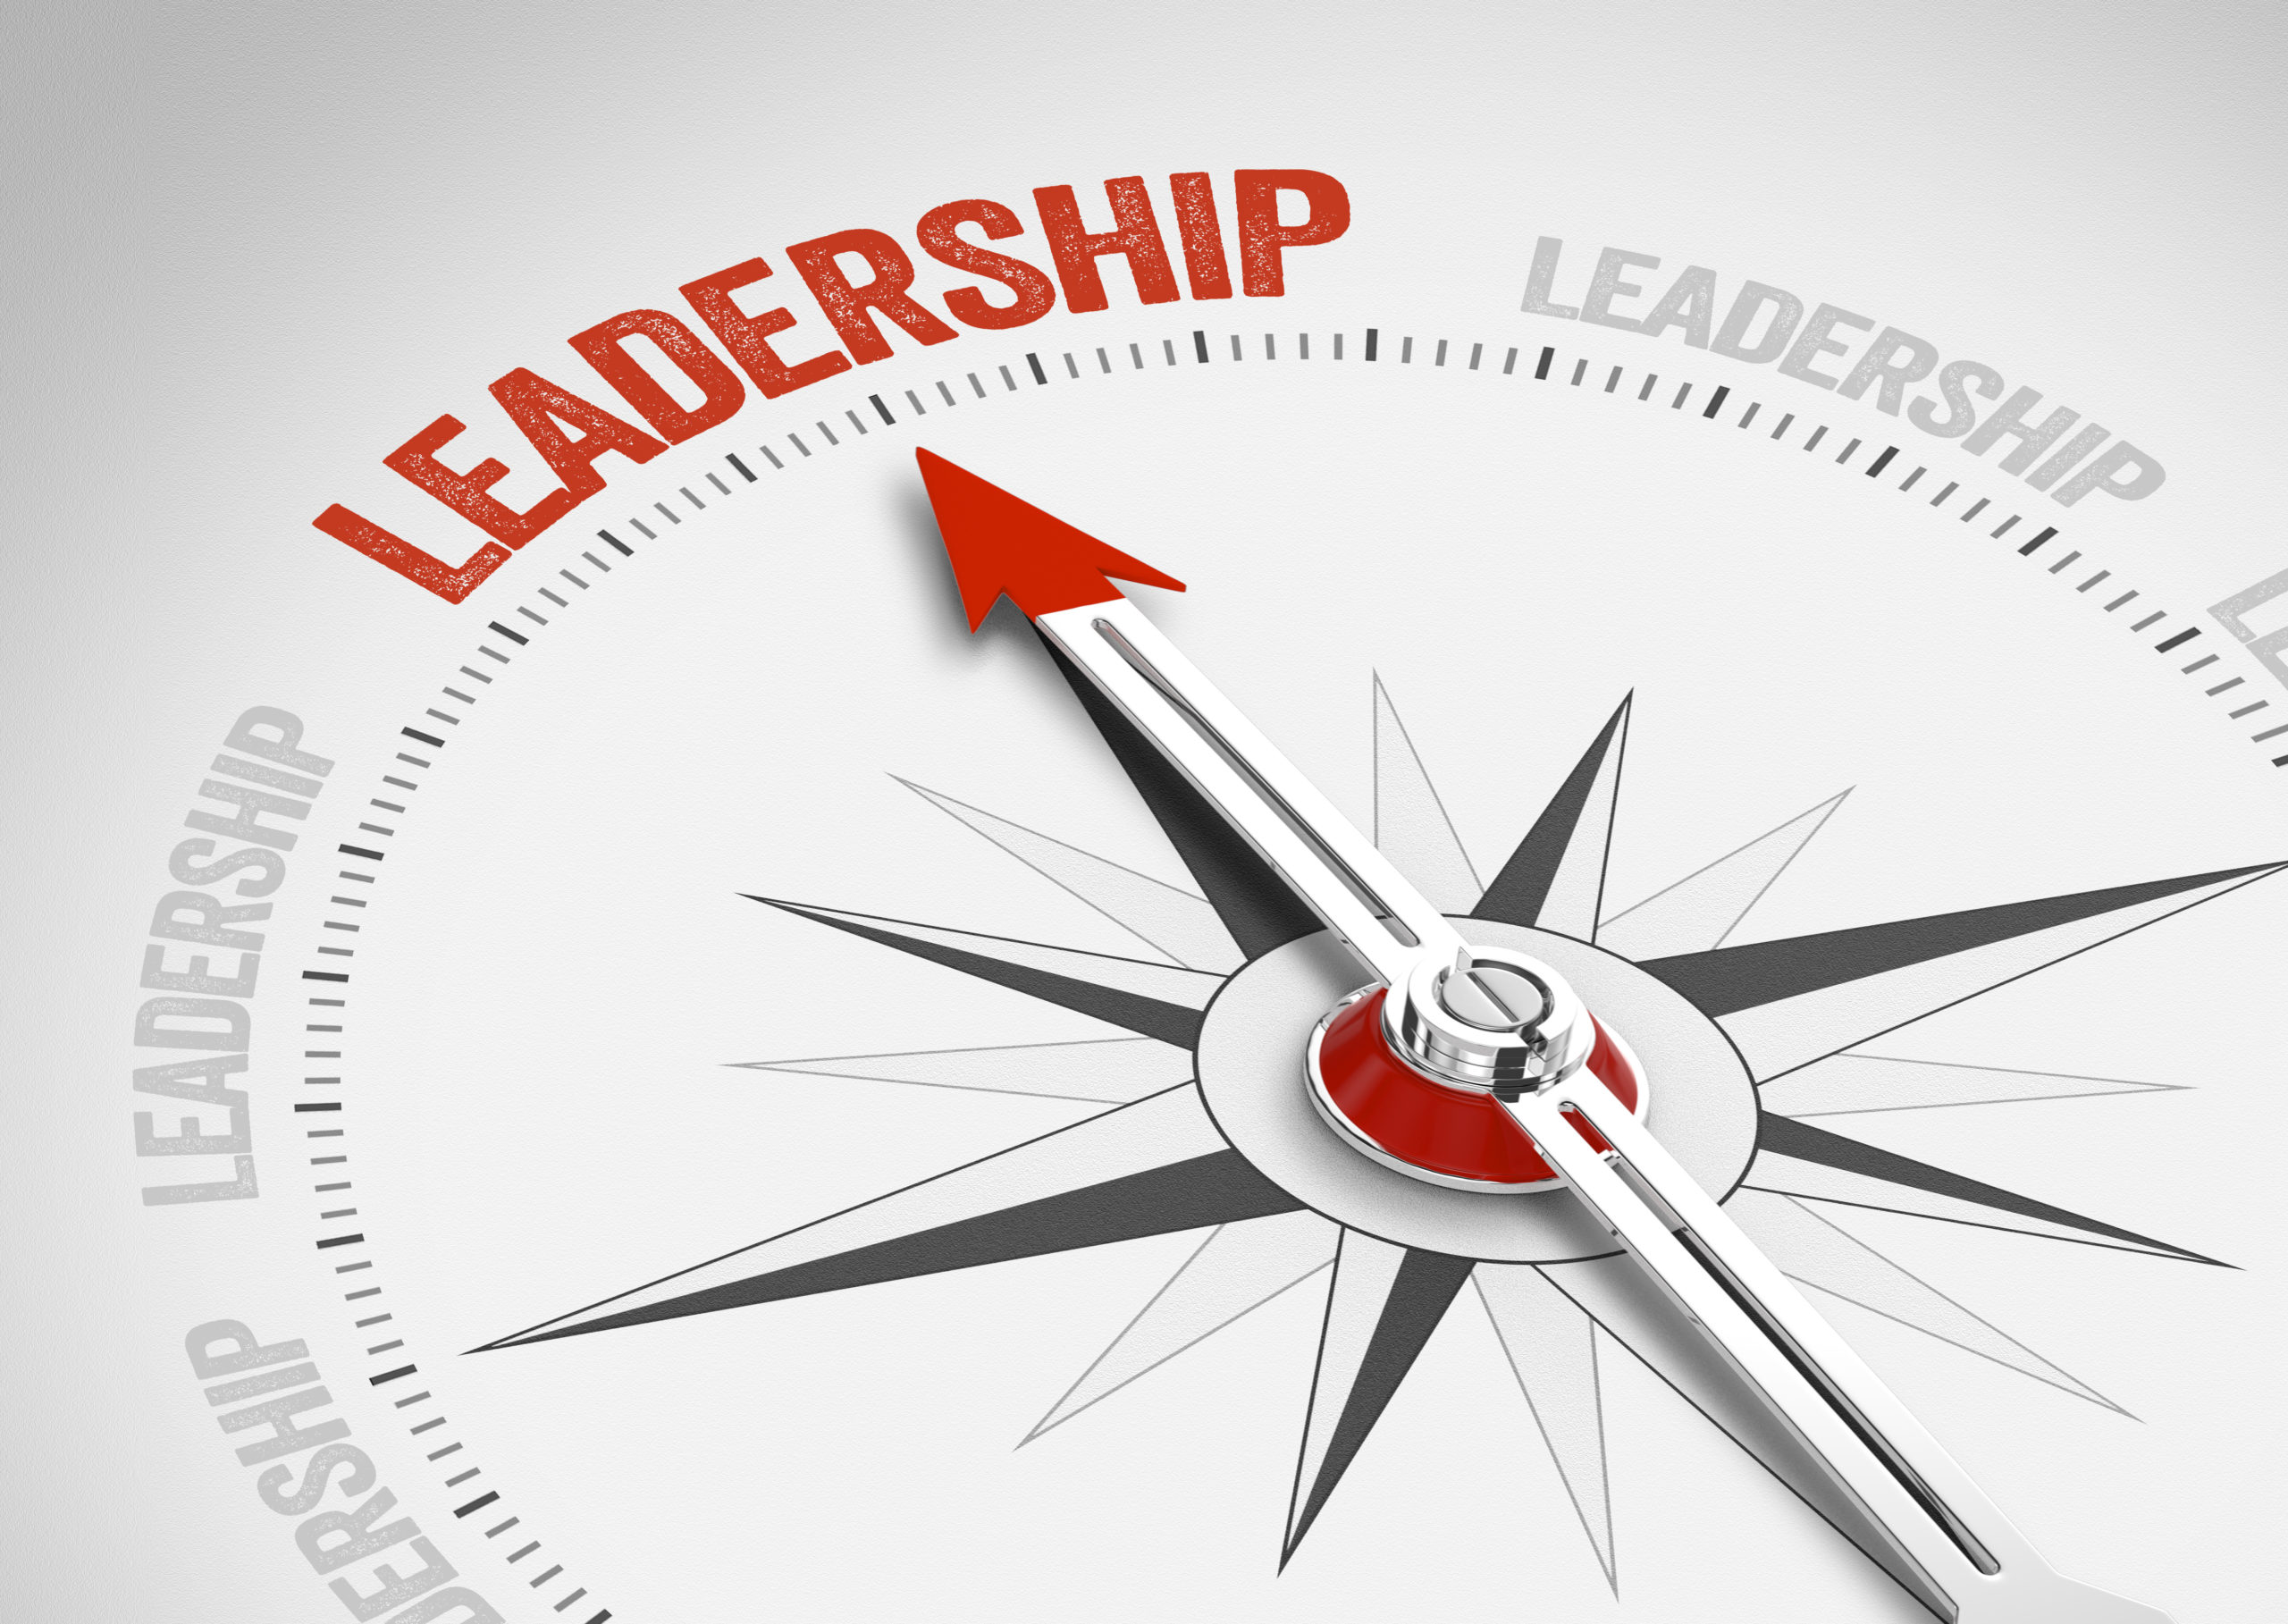 Picture of Compass with the word Leadership